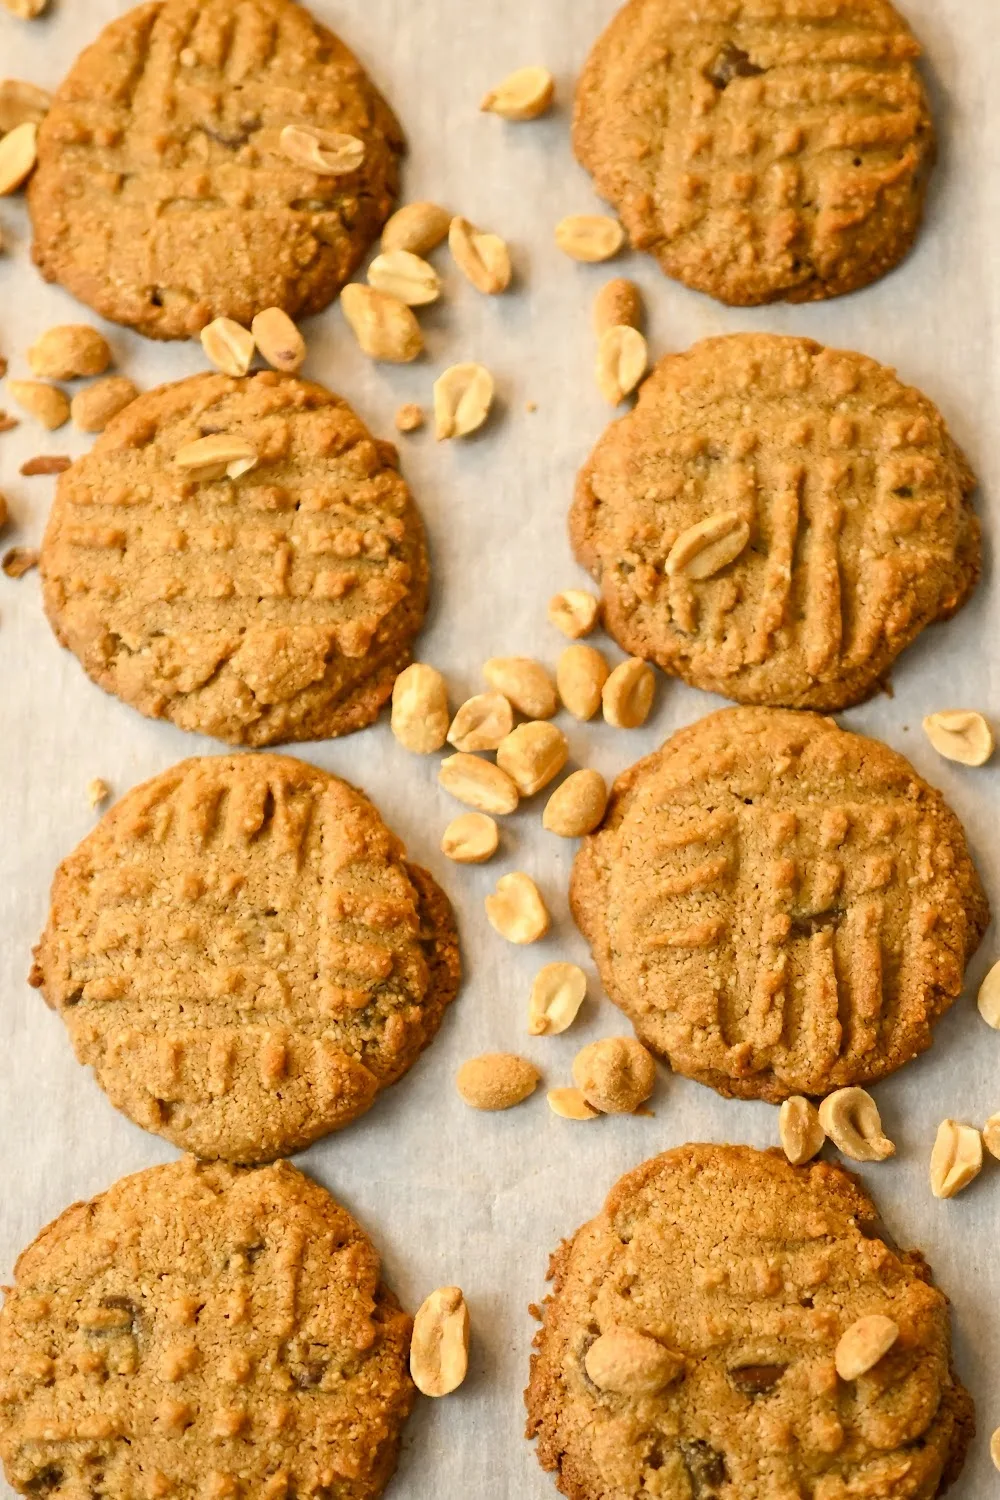 keto-friendly peanut butter chocolate chip cookies baked on a parchment lined cookie sheet